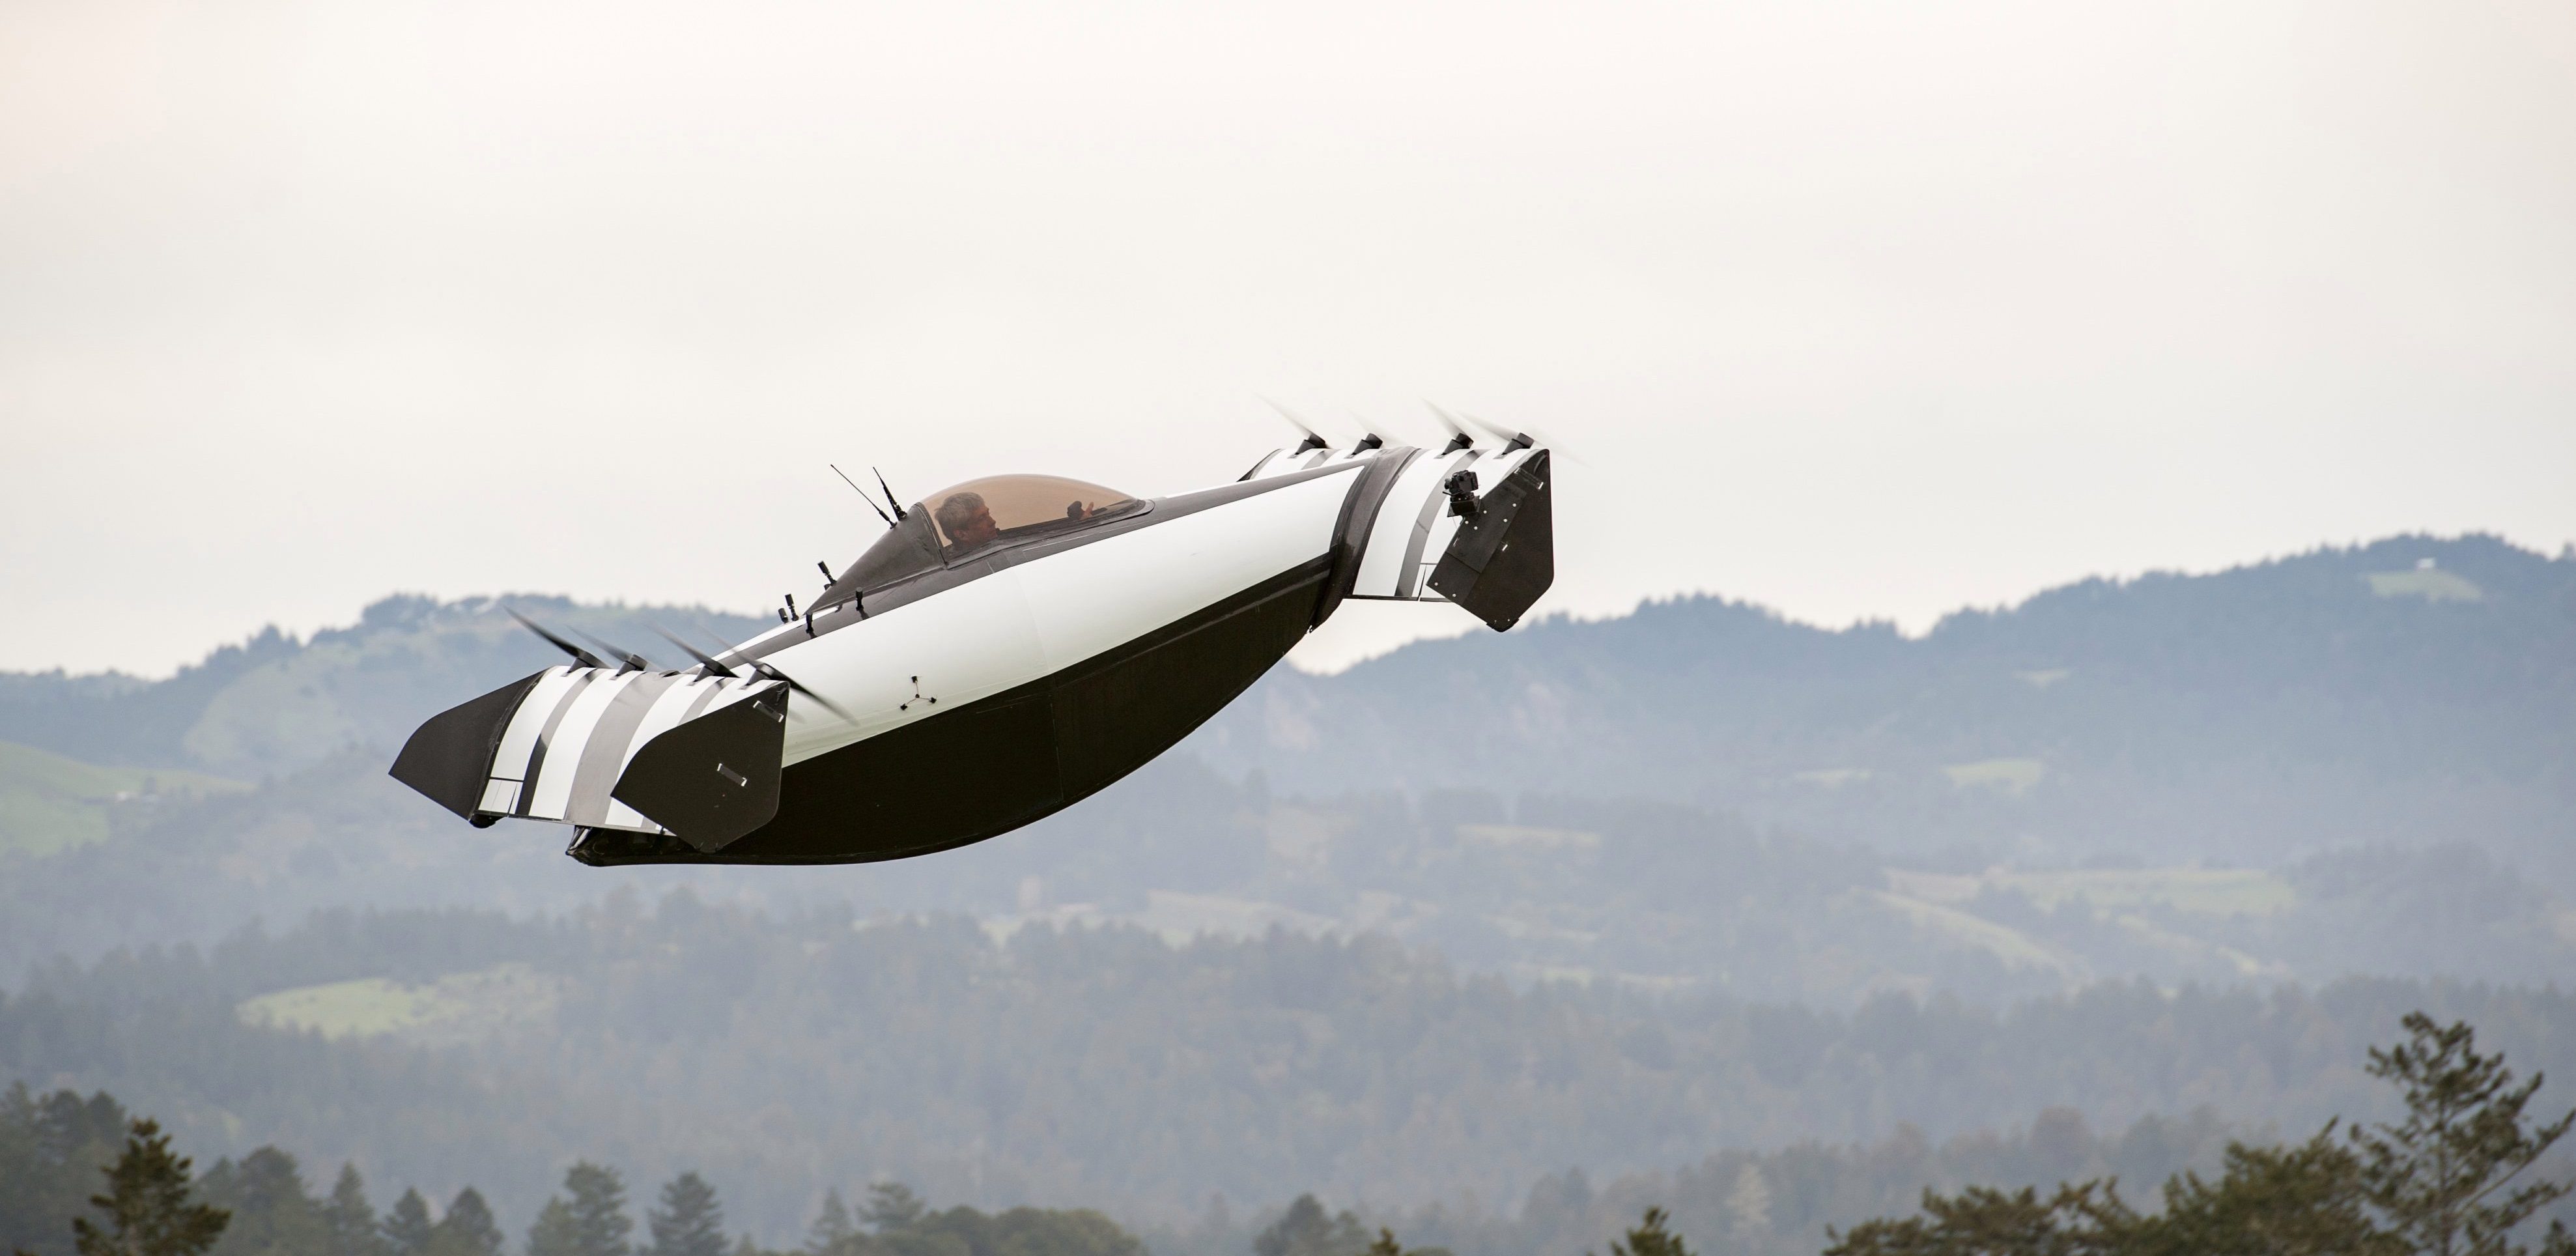 Watch impressive new allelectric personal VTOL aircraft working